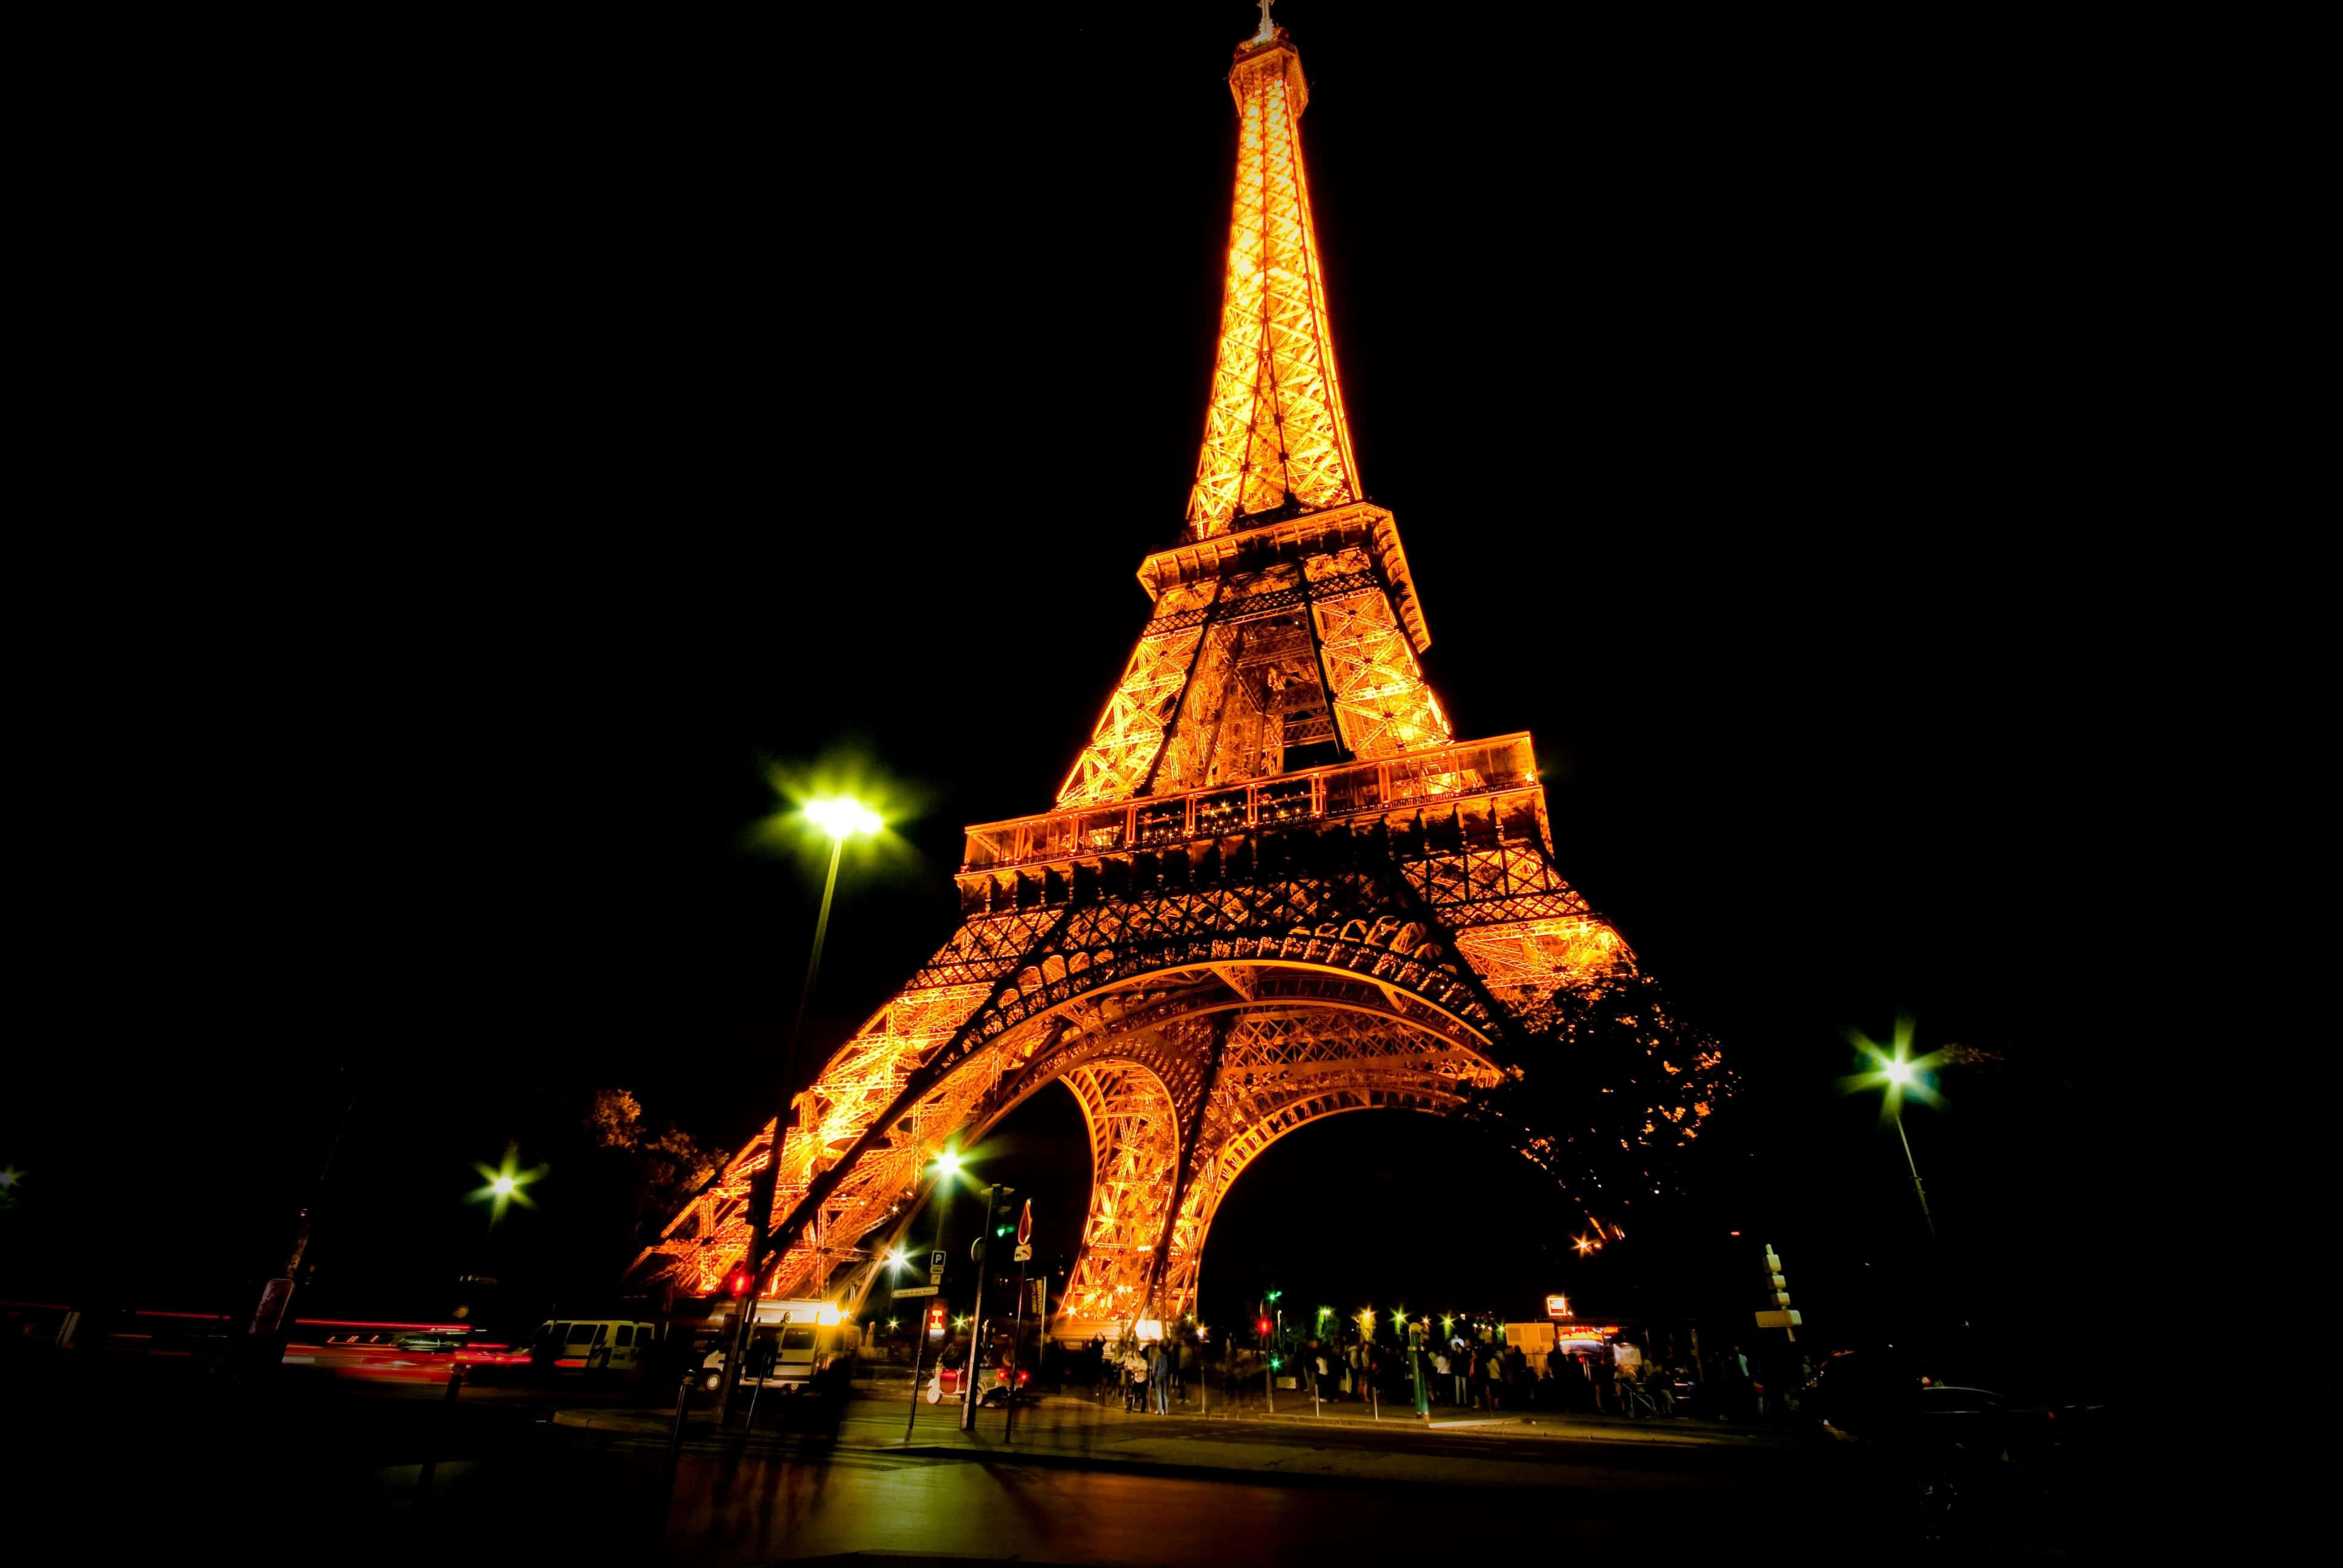 The Eiffel Tower lights up the night sky in the City of Lights.